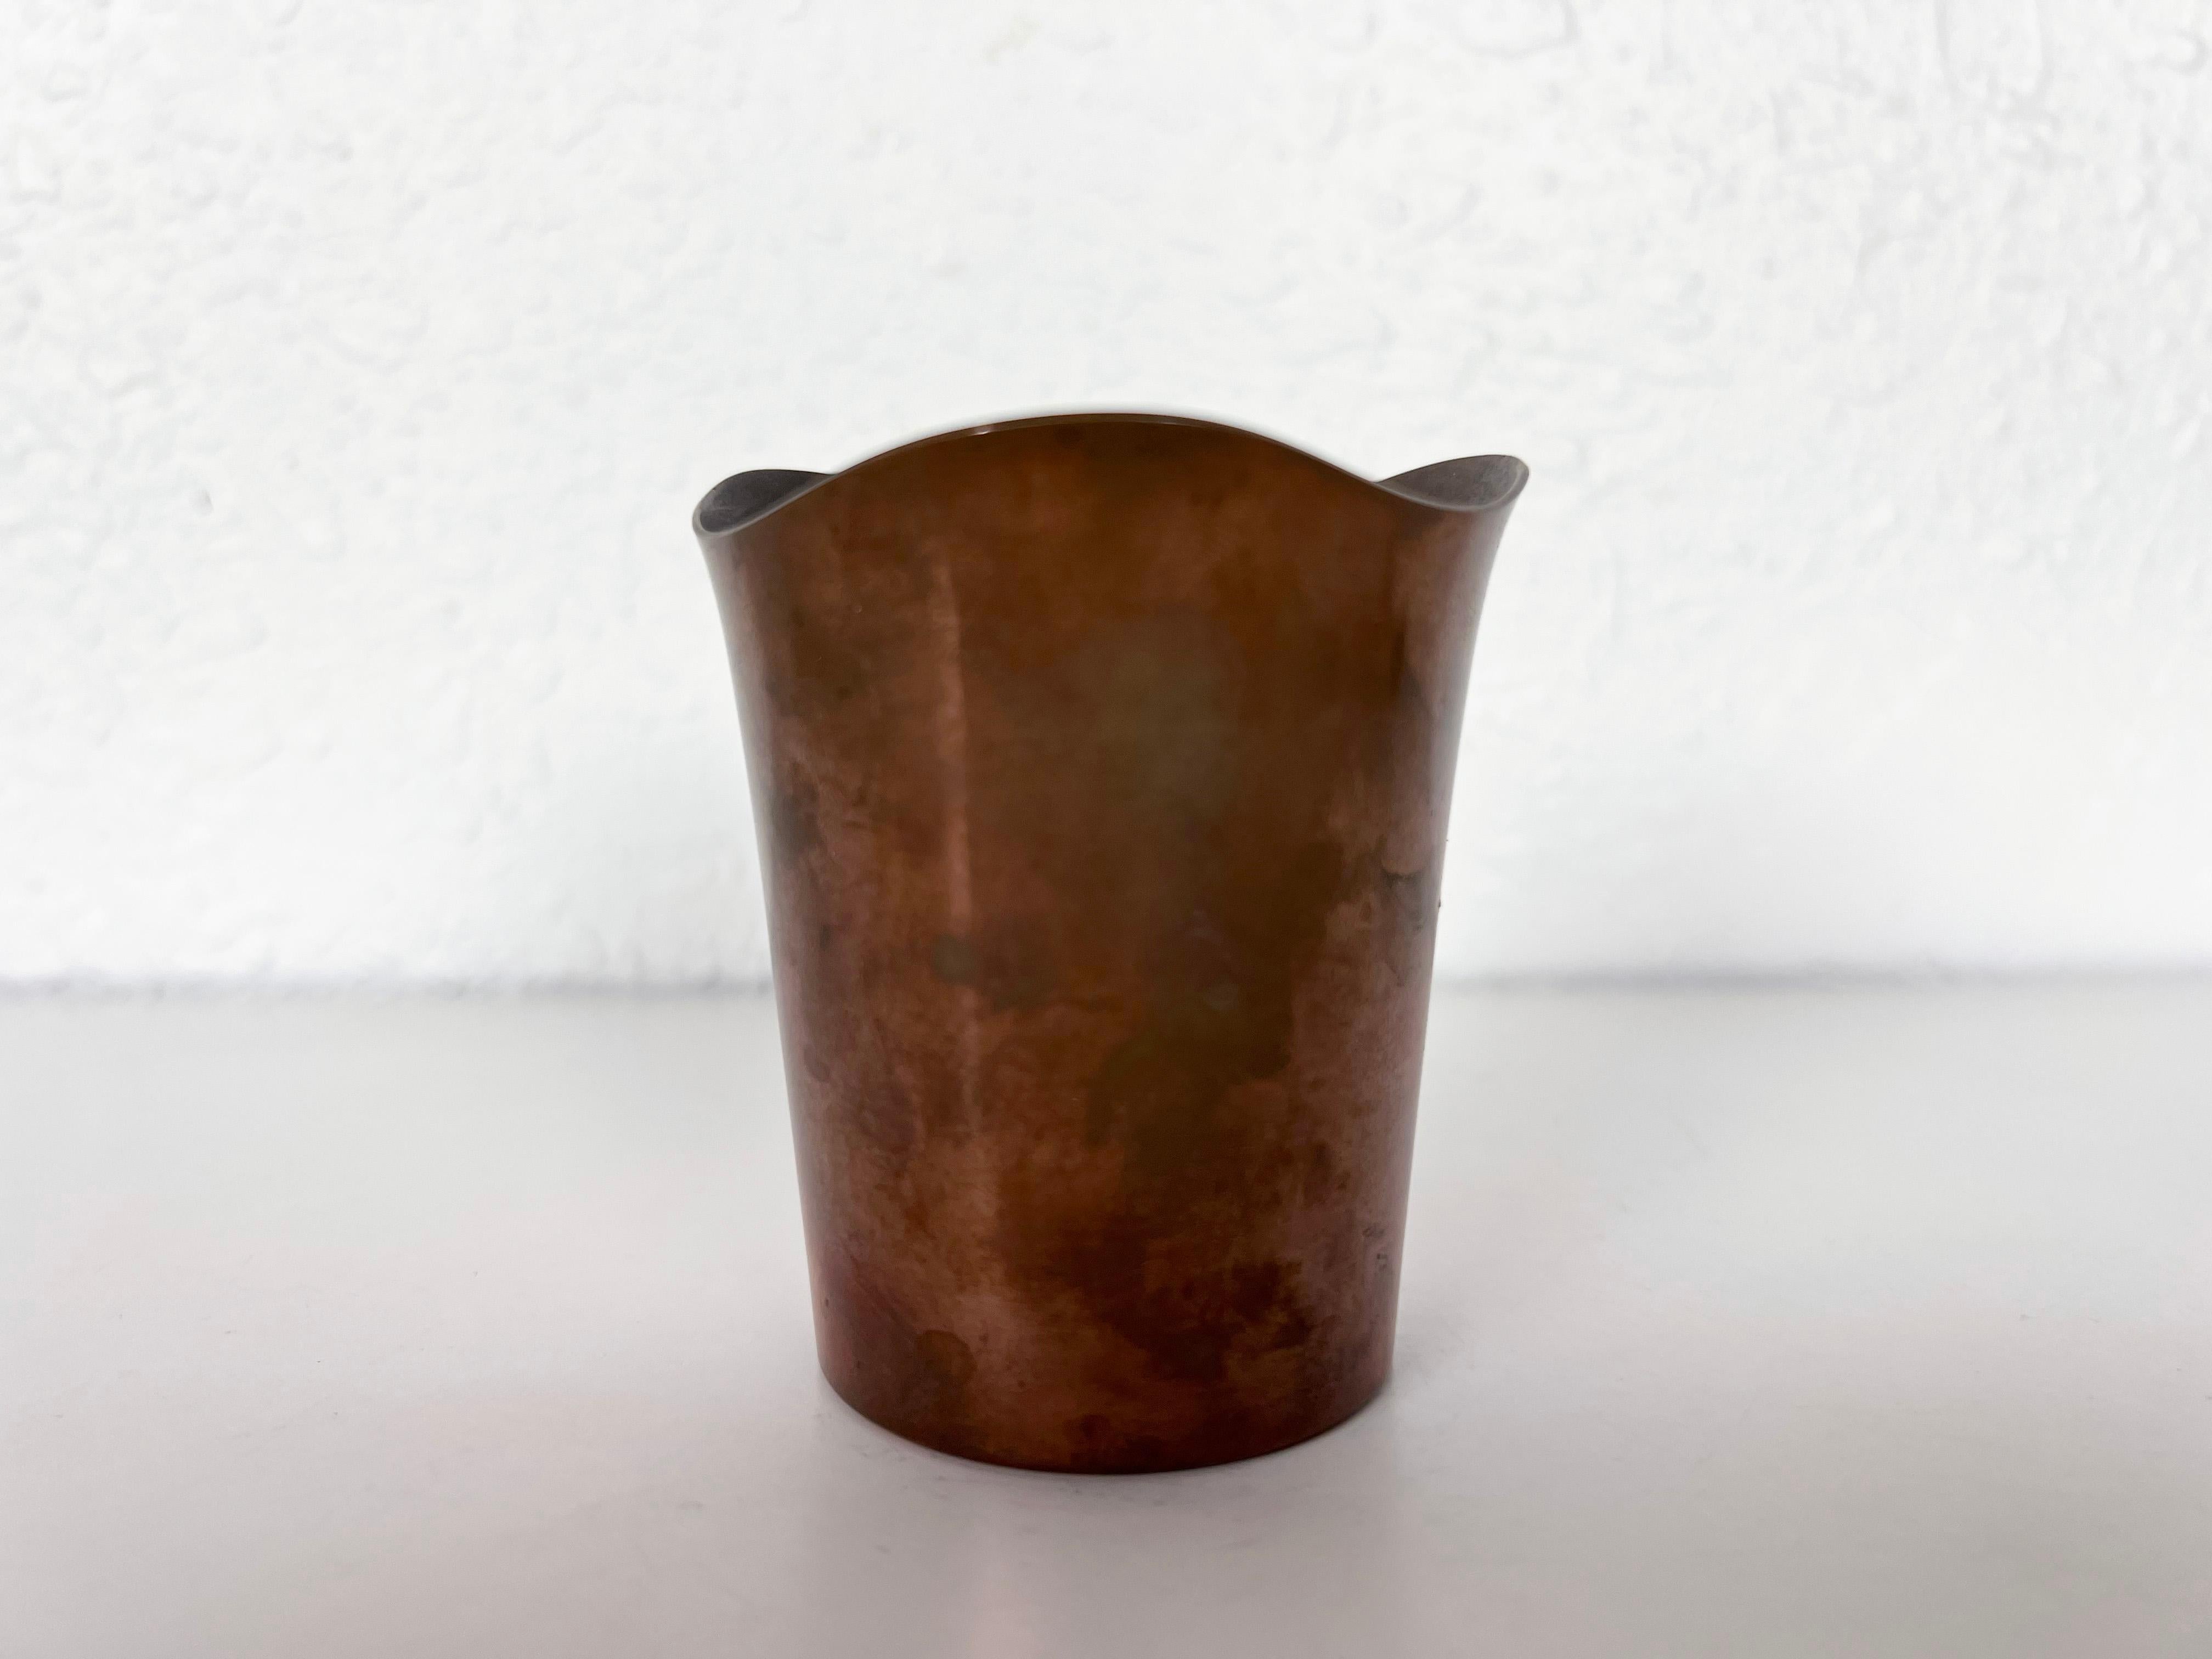 Vintage modernist freeform copper cup by Danish silversmith Ernst Dragsted.

Artist: Ernst Dragsted

Origin: Denmark

Year: 1950s - 60s

Style: Mid Century Modern 

Dimensions: 3